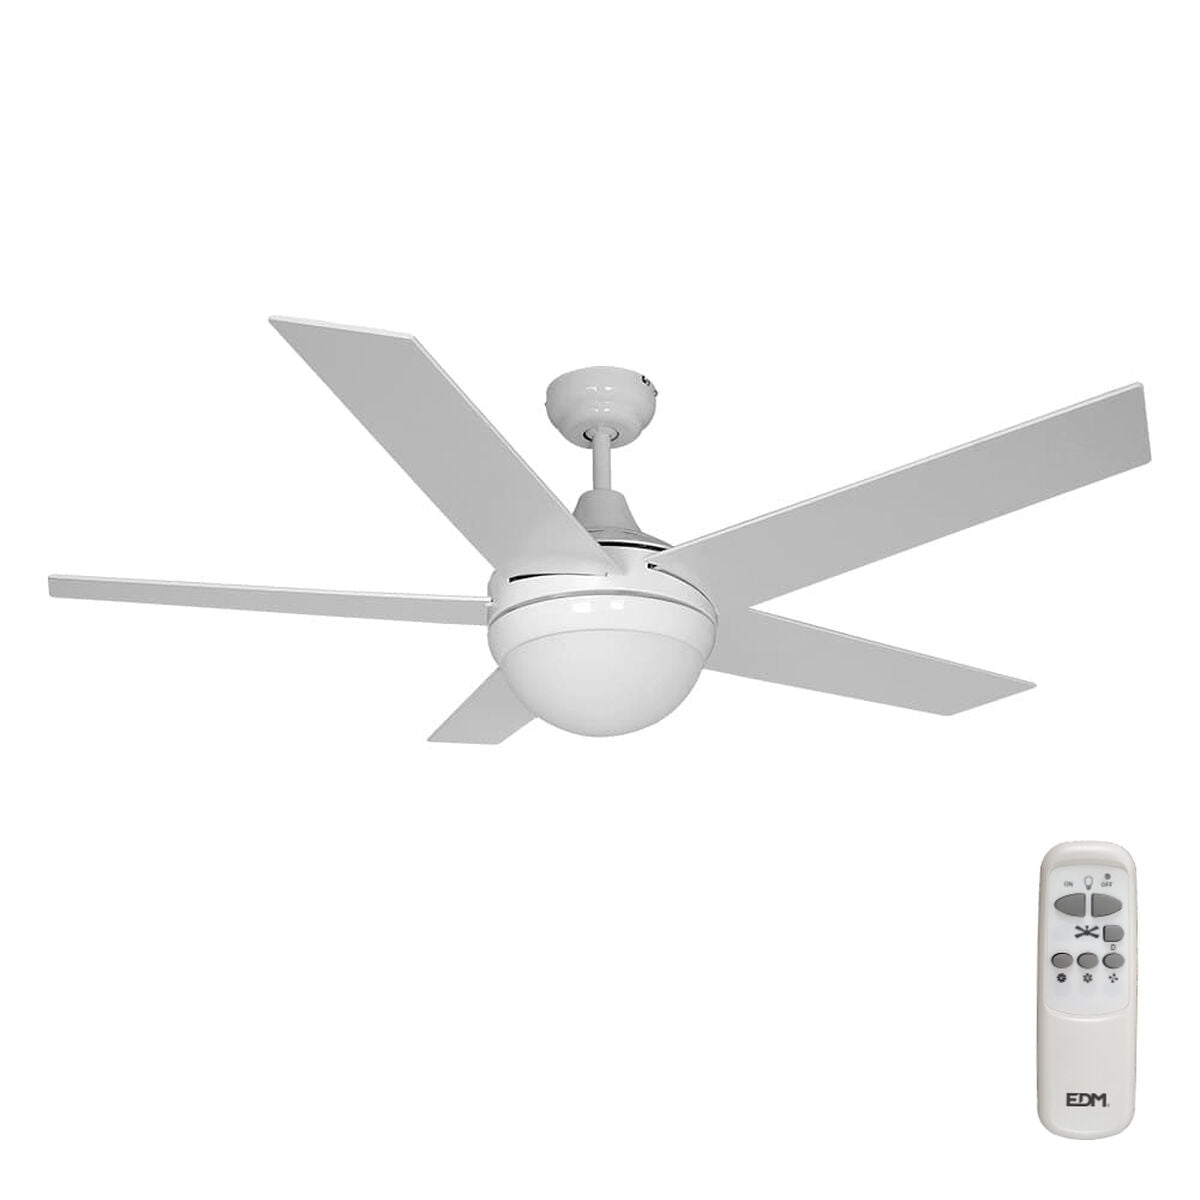 Ceiling Fan with Light EDM 33988 Adriatico White 60 W, EDM, Lighting, Indoor lighting, ceiling-fan-with-light-edm-33988-adriatico-white-60-w, Brand_EDM, category-reference-2399, category-reference-2450, category-reference-2451, category-reference-t-10333, category-reference-t-10347, category-reference-t-19657, Condition_NEW, led / lighting, Price_200 - 300, small electric appliances, summer, RiotNook